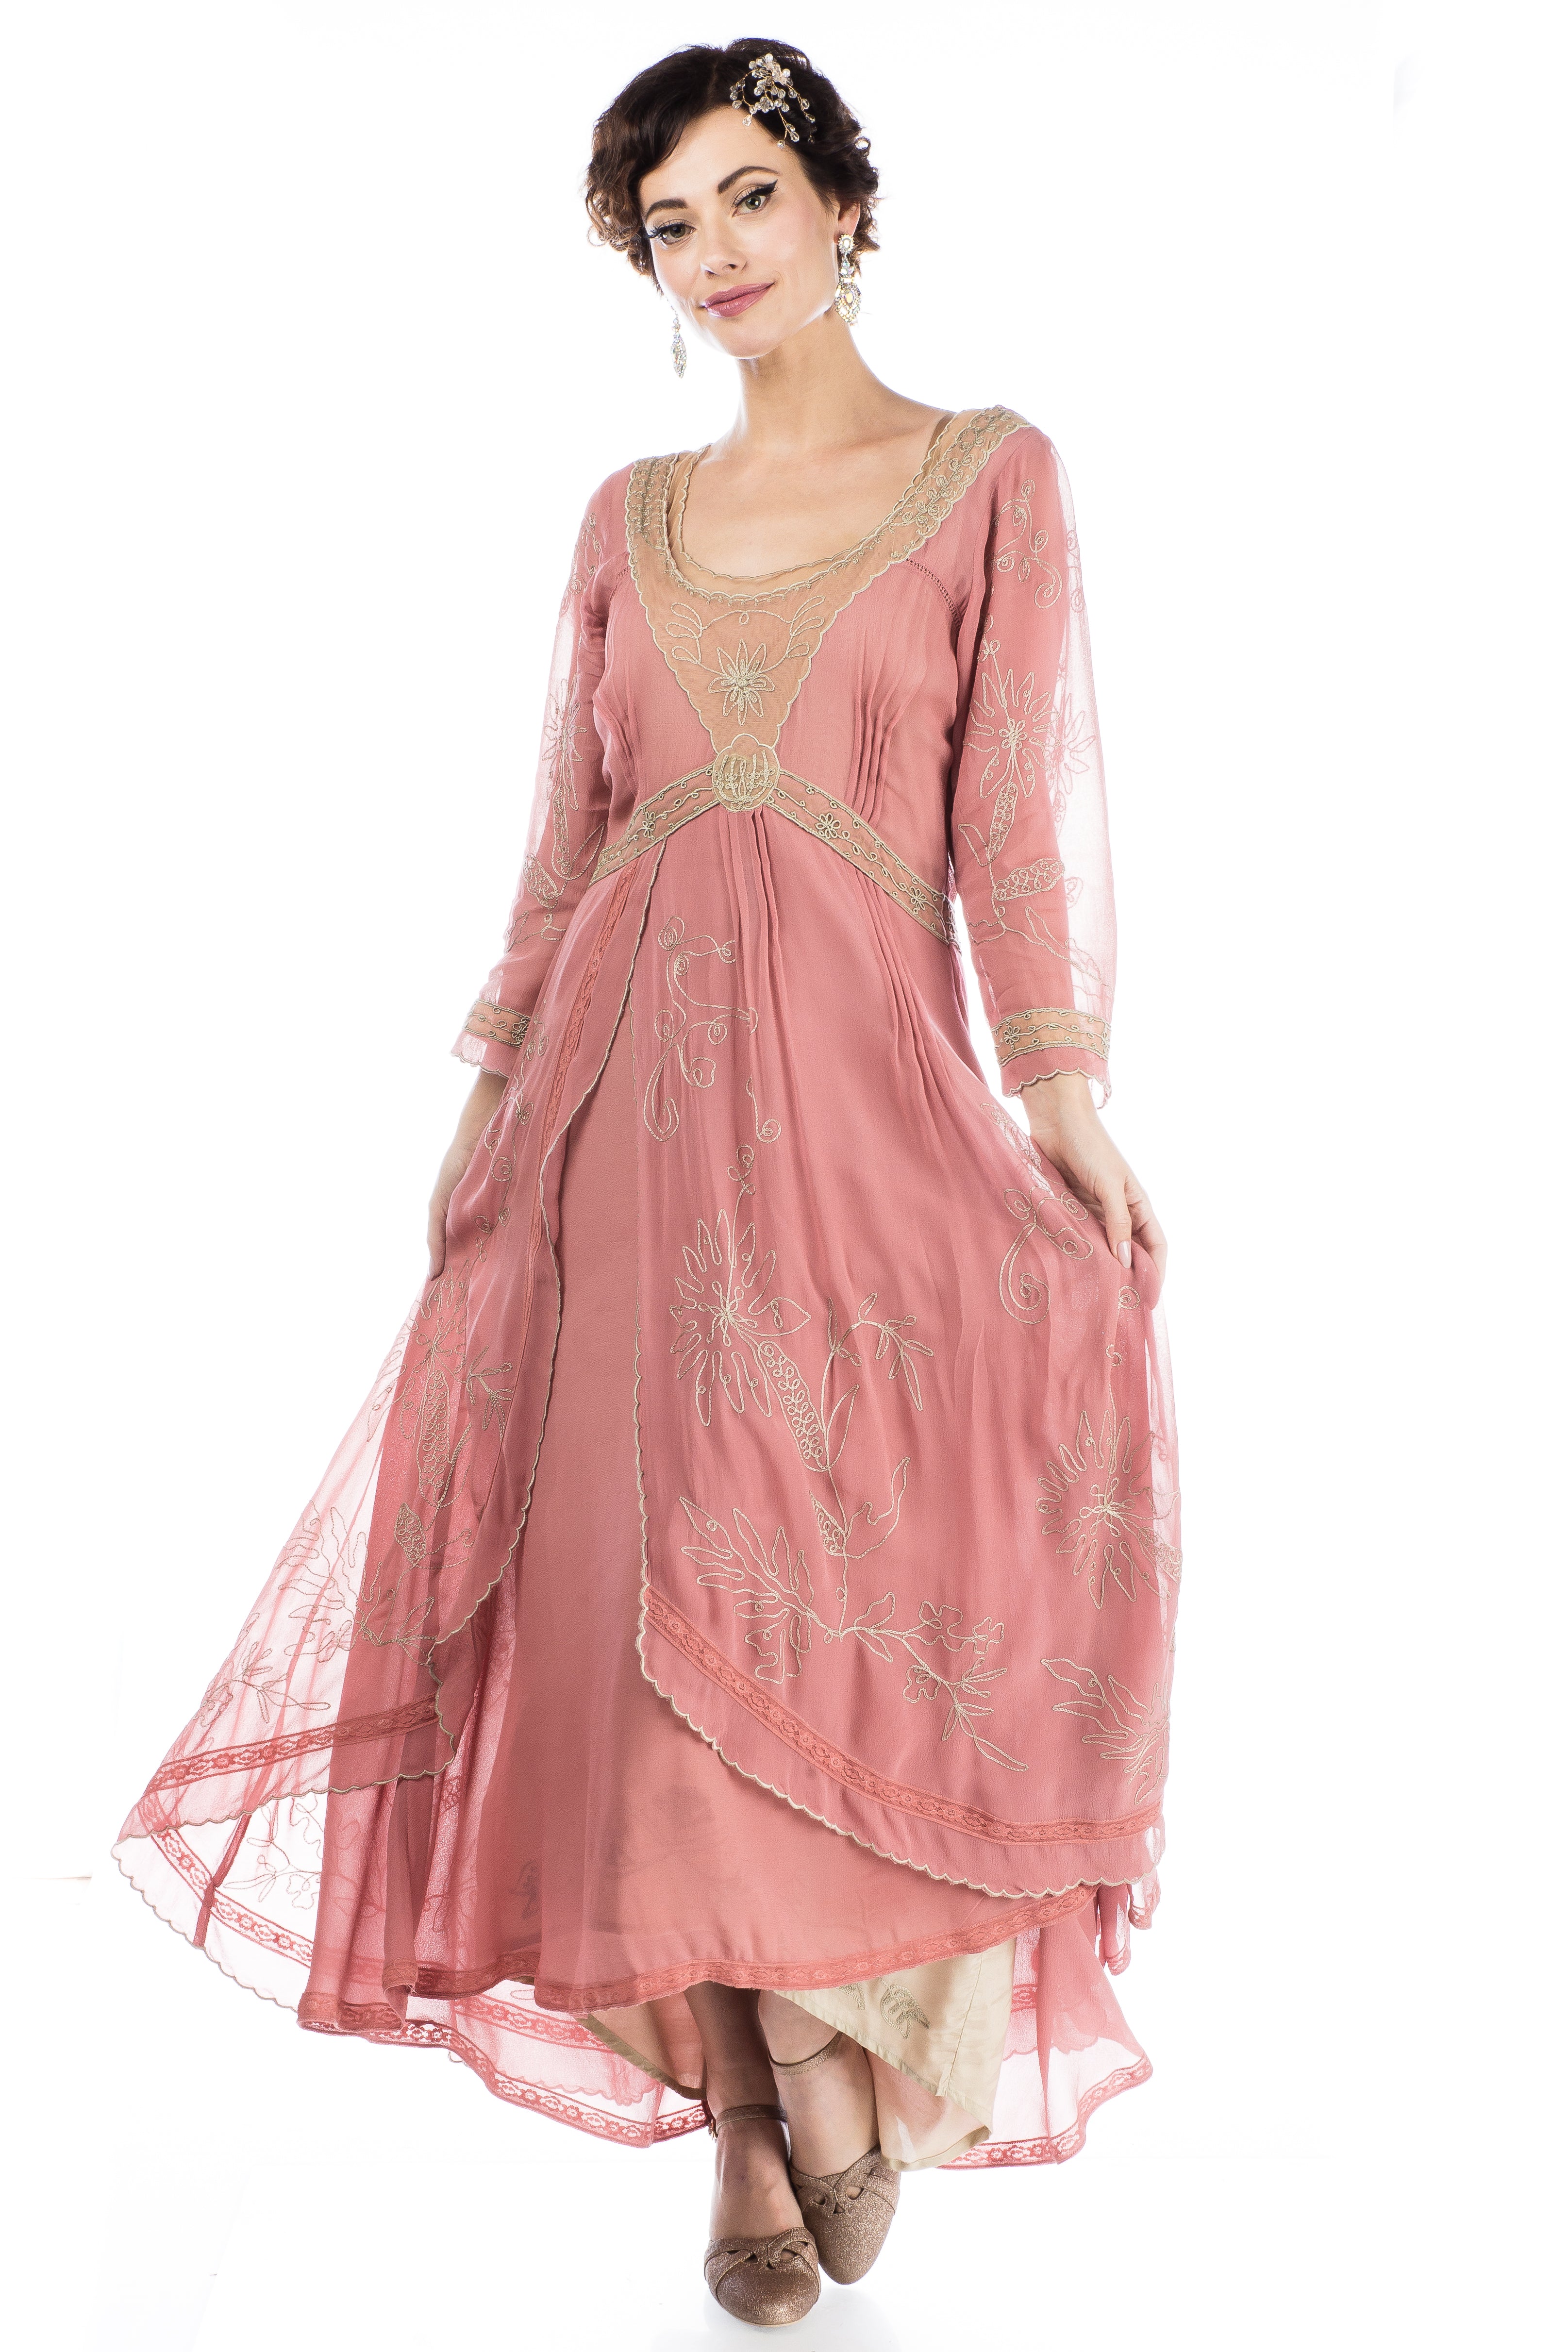 model wearing a Downton Abbey Inspired long sleeved Dress in Pink and Beige by Nataya